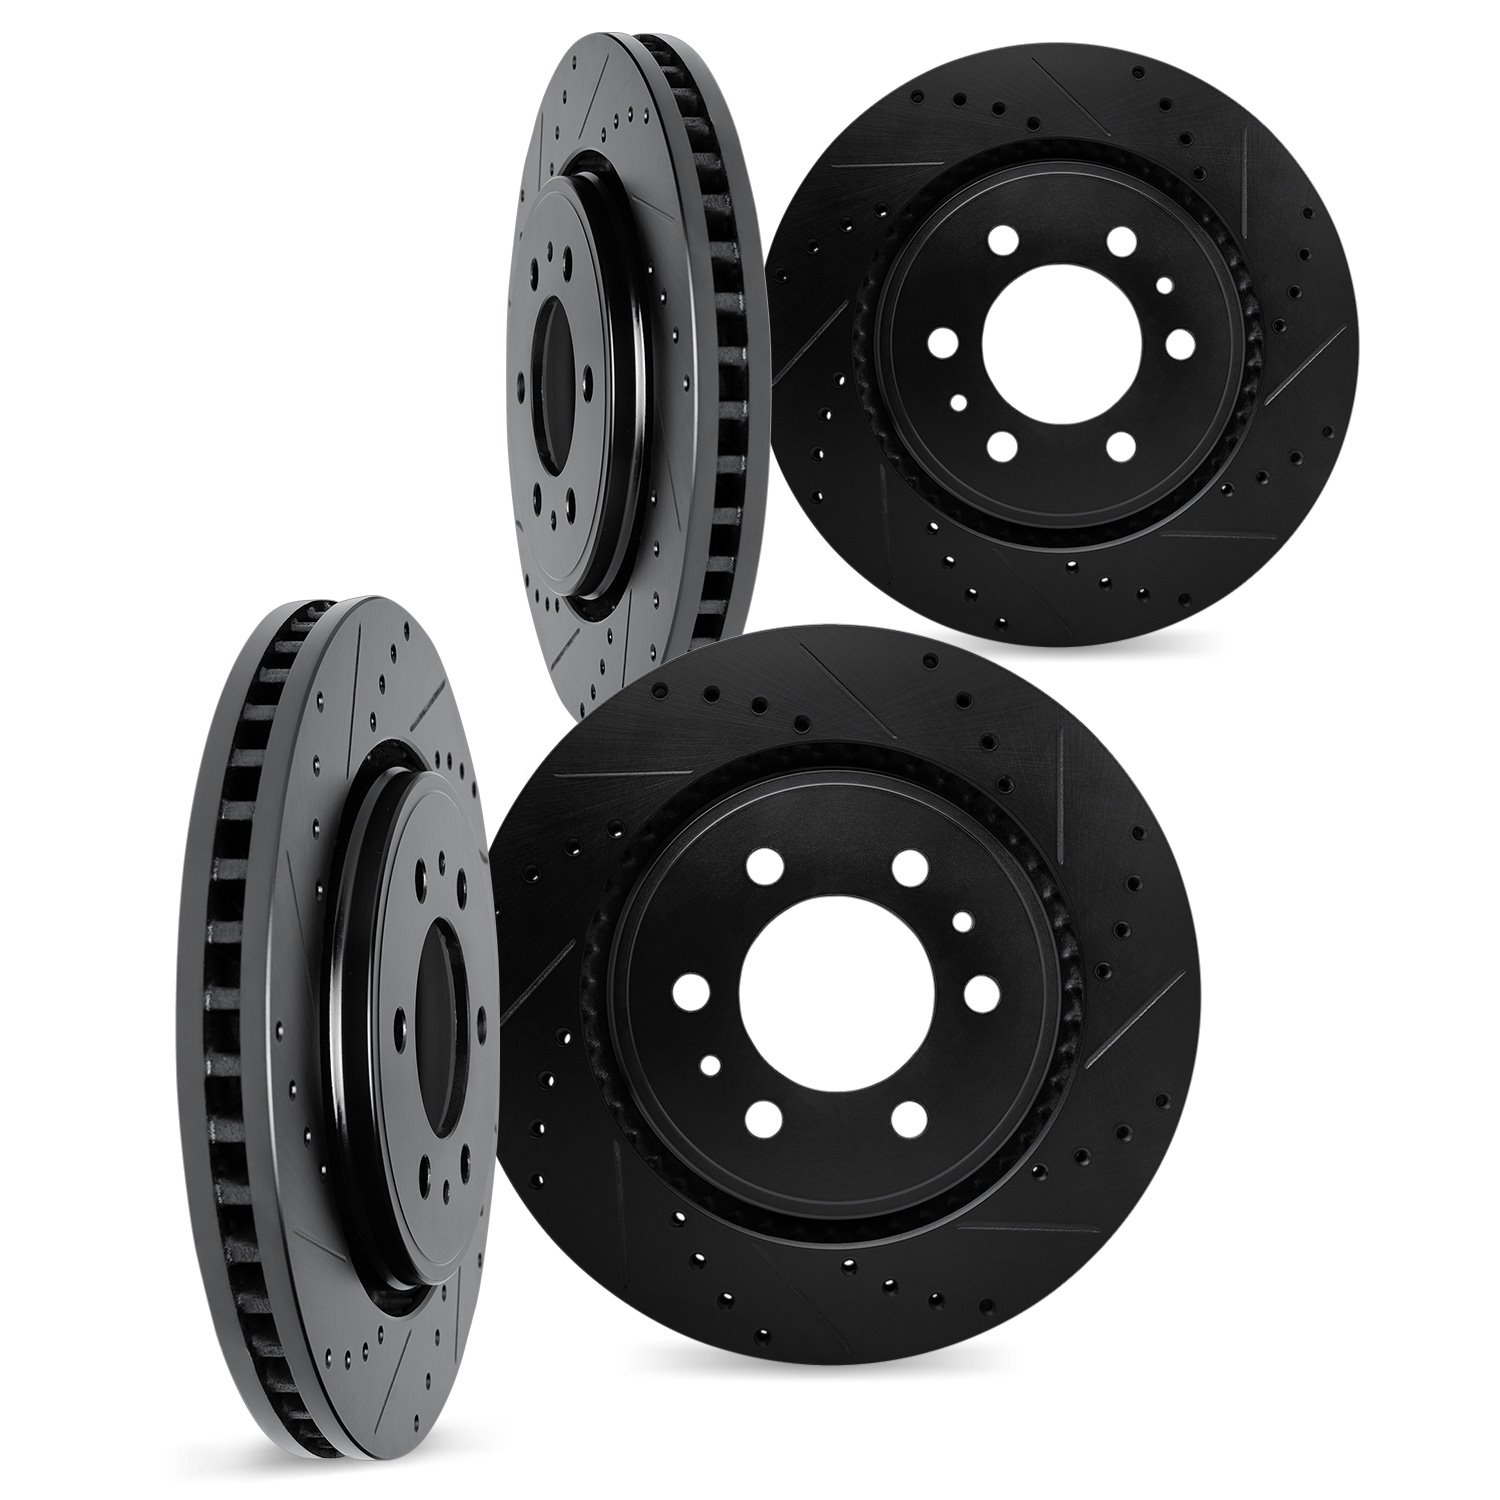 8004-76146 Drilled/Slotted Brake Rotors [Black], 2001-2007 Lexus/Toyota/Scion, Position: Front and Rear